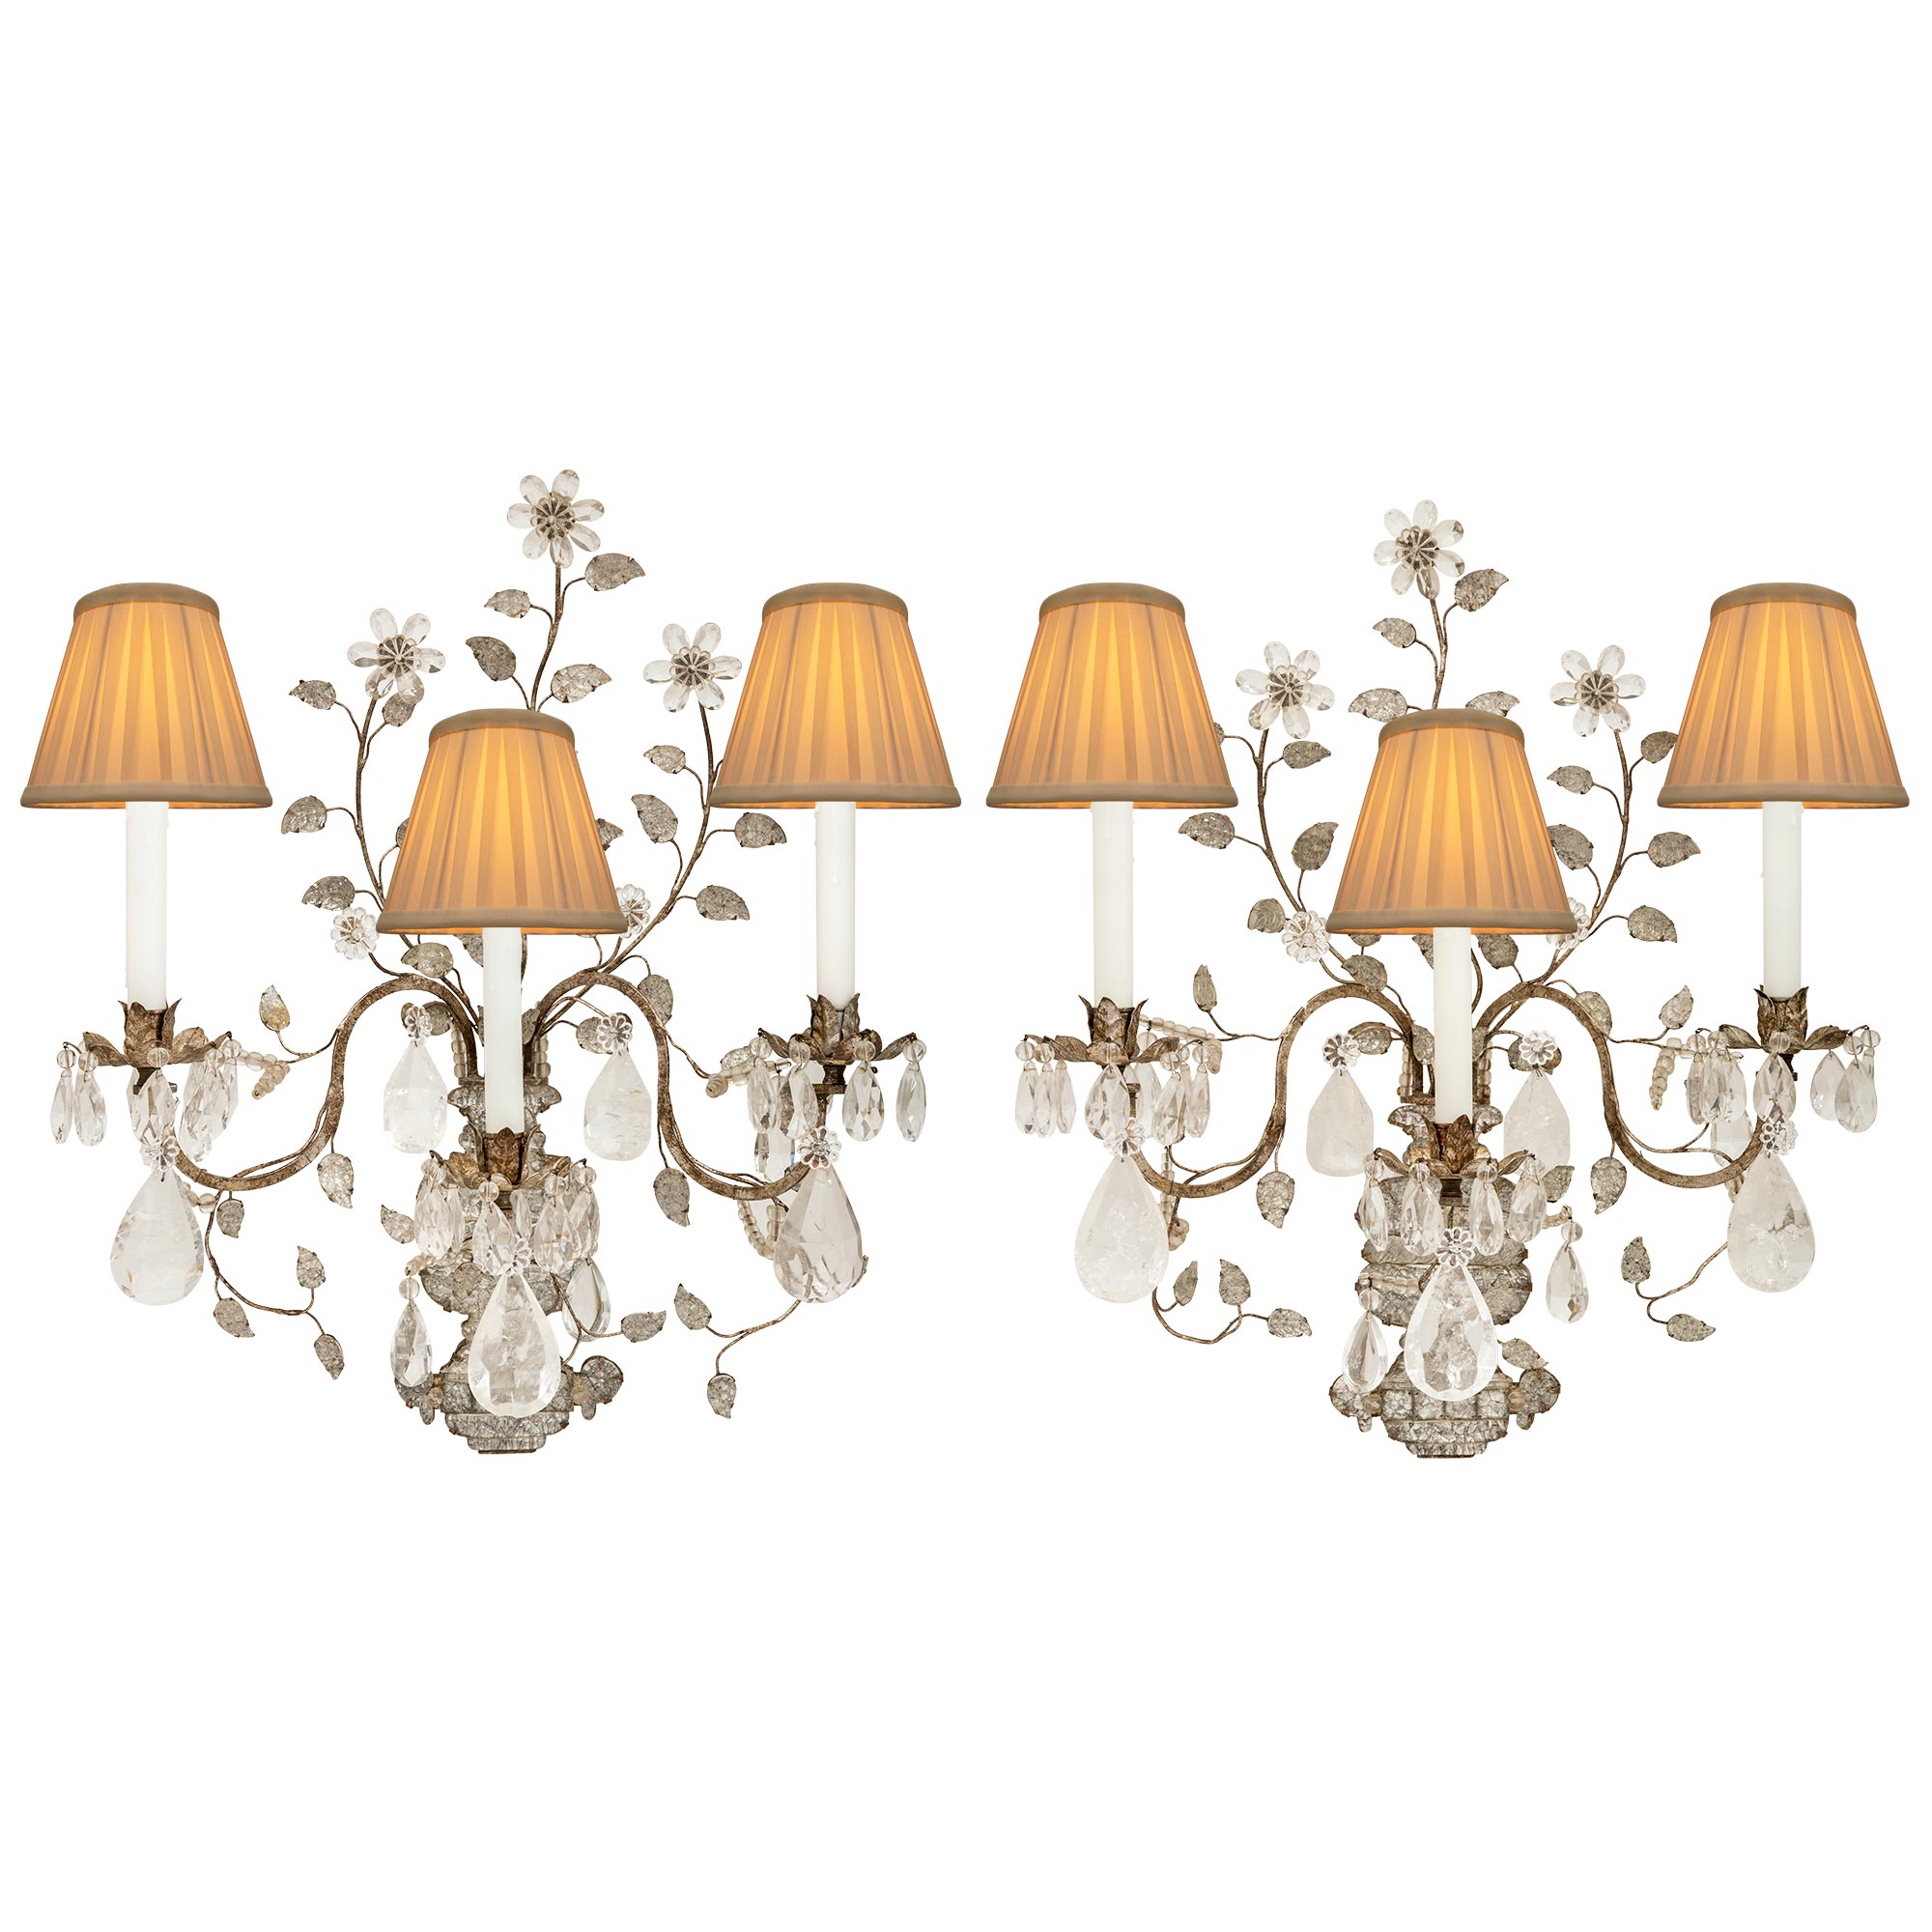 True Pair of French Turn of the Century Louis XVI St. Rock Crystal Sconces For Sale